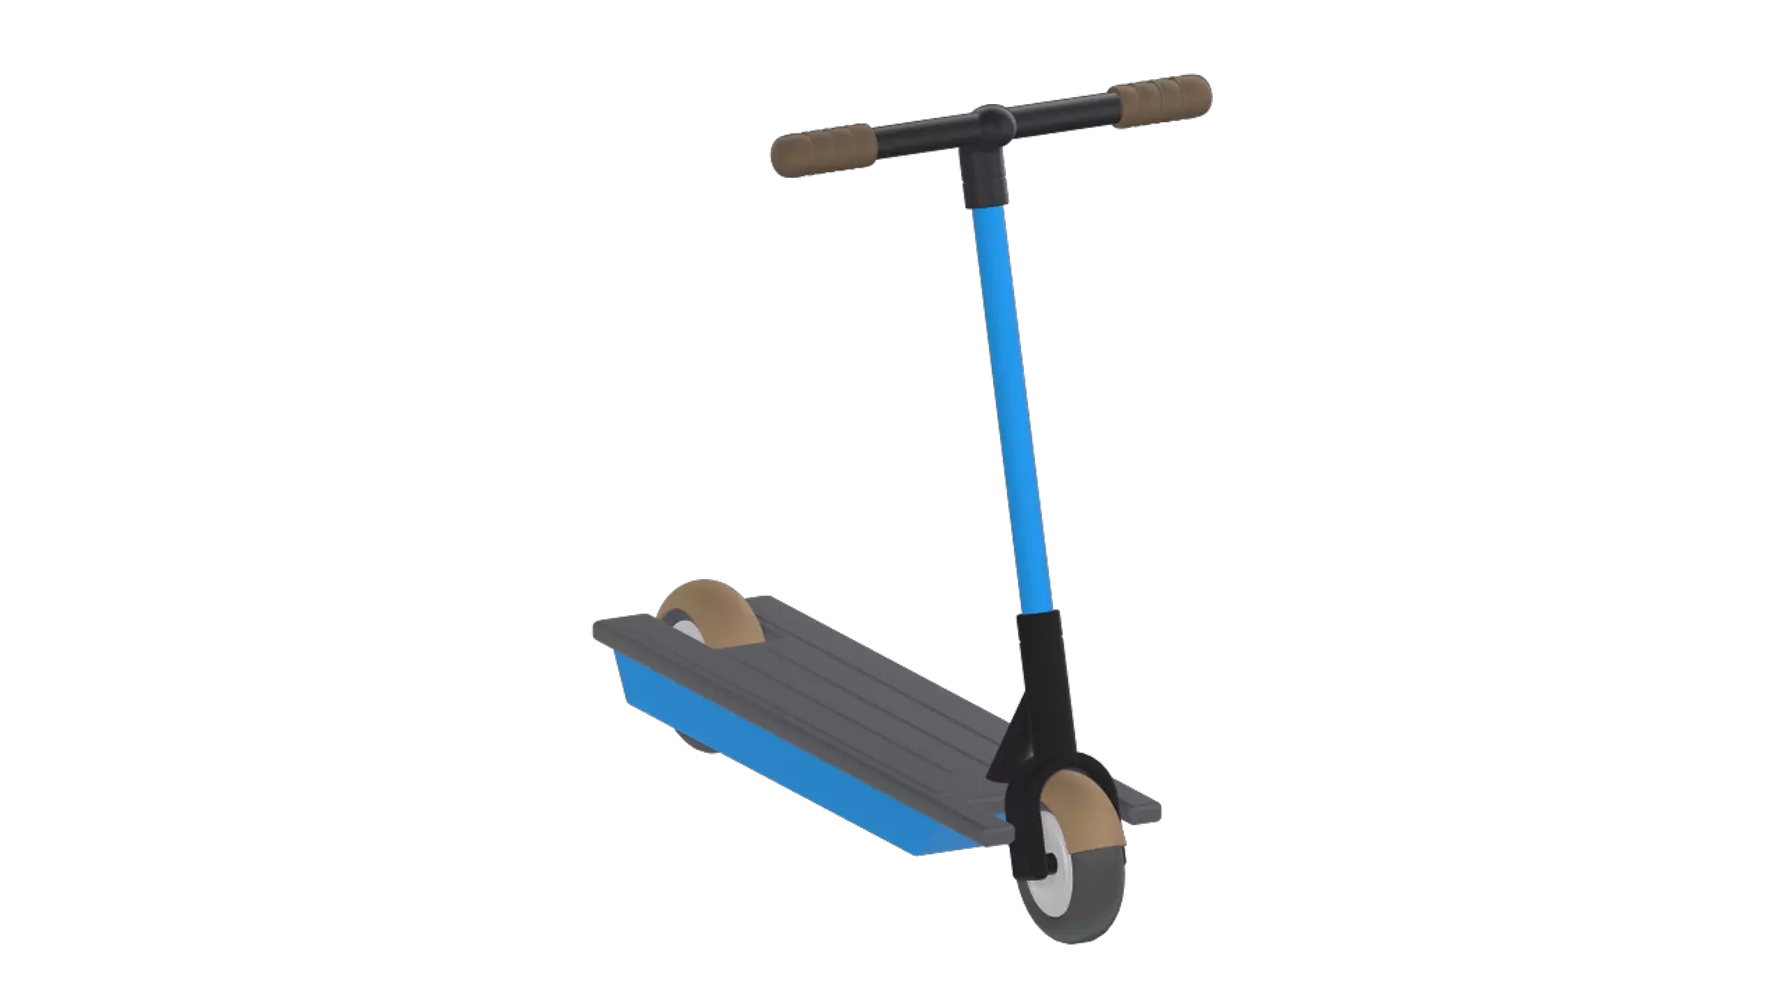 Scooter 3D Graphic